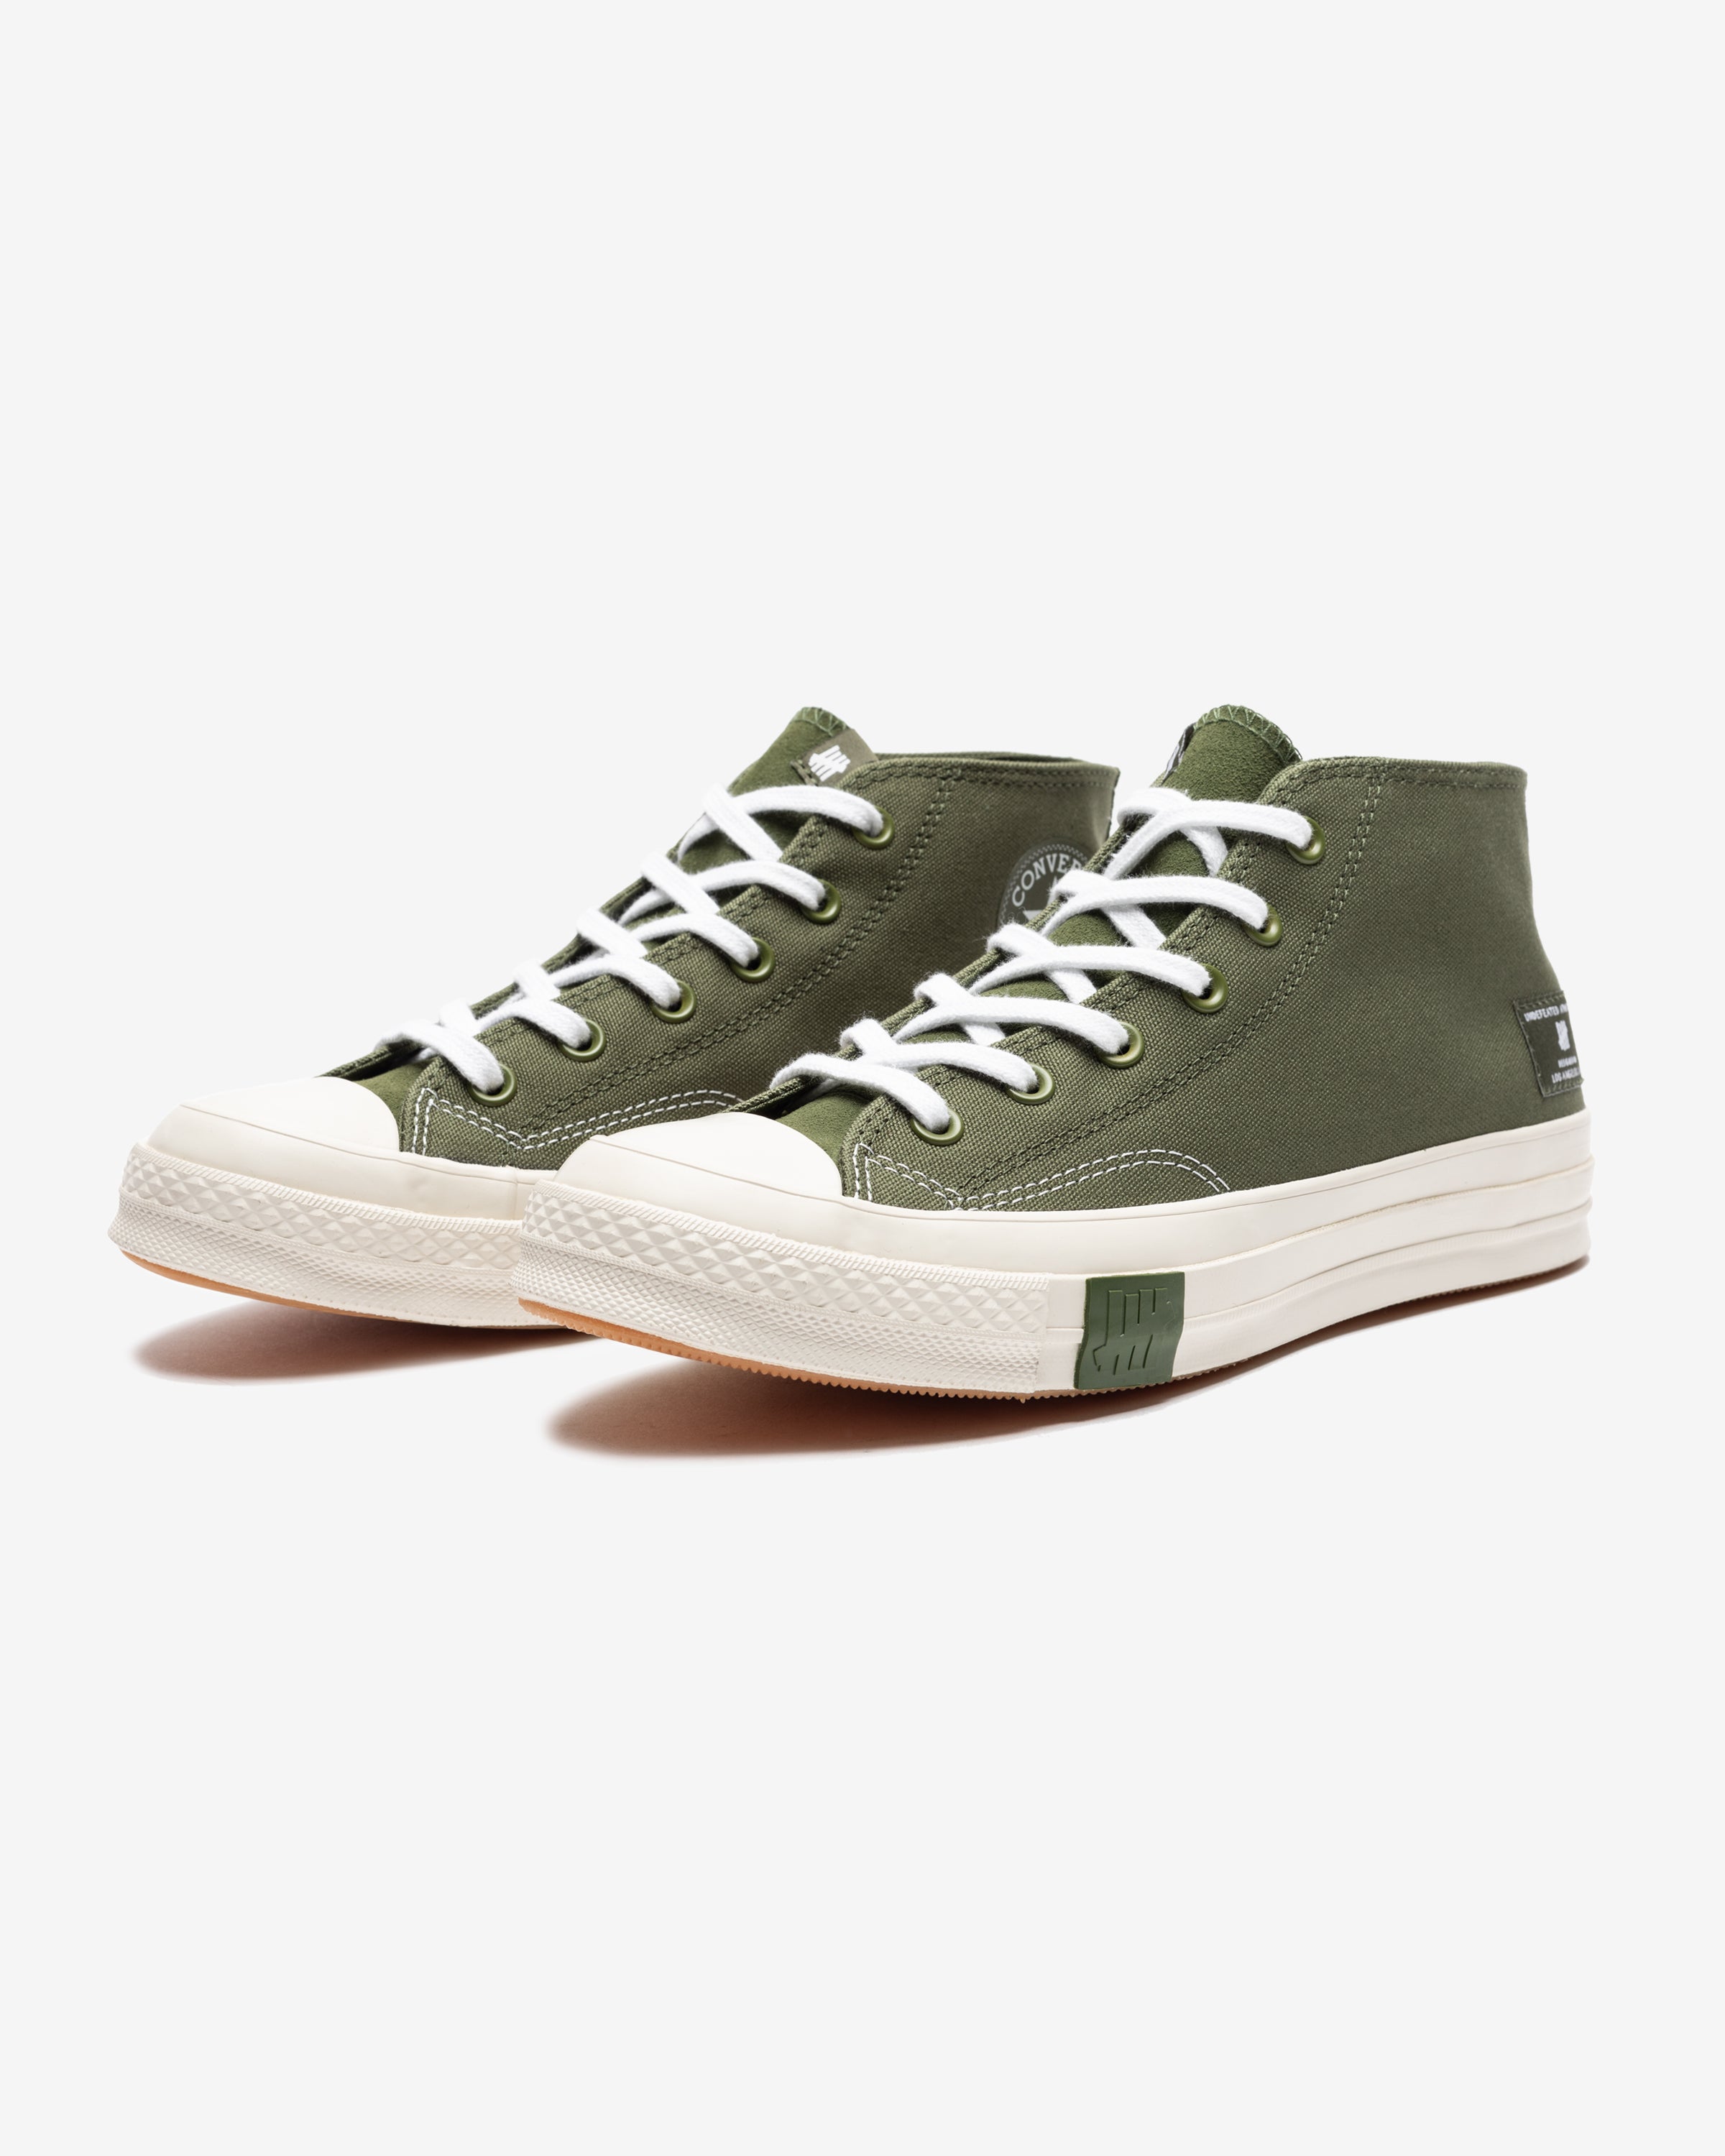 CONVERSE X UNDEFEATED CHUCK 70 MID - CHIVE/ PARCHMENT